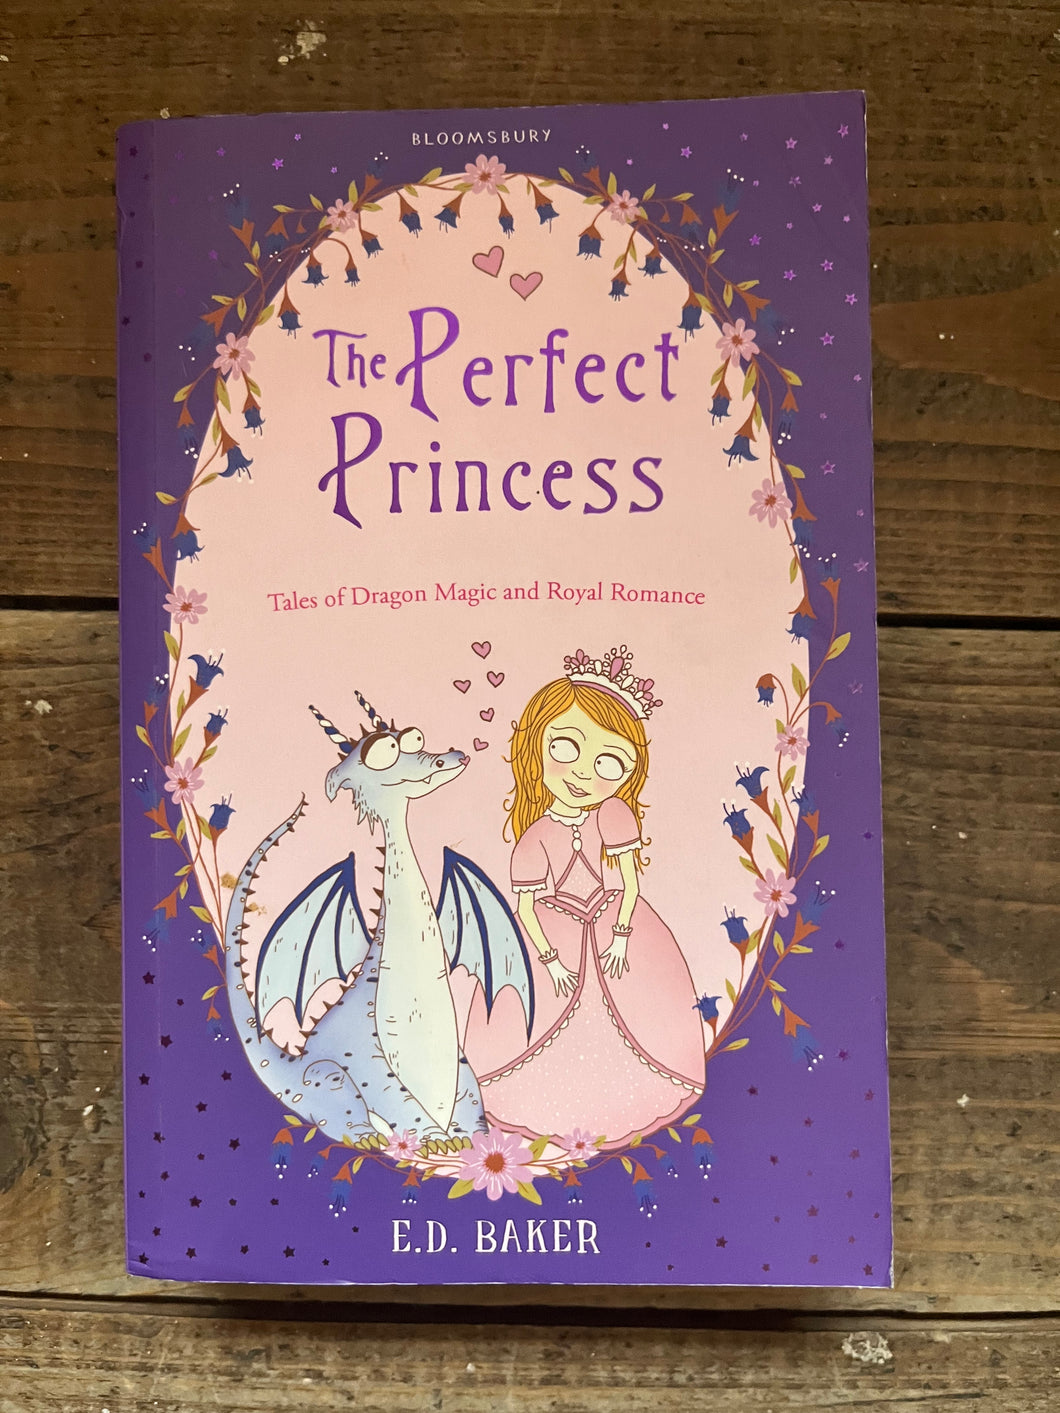 The Perfect Princess by E.D Baker